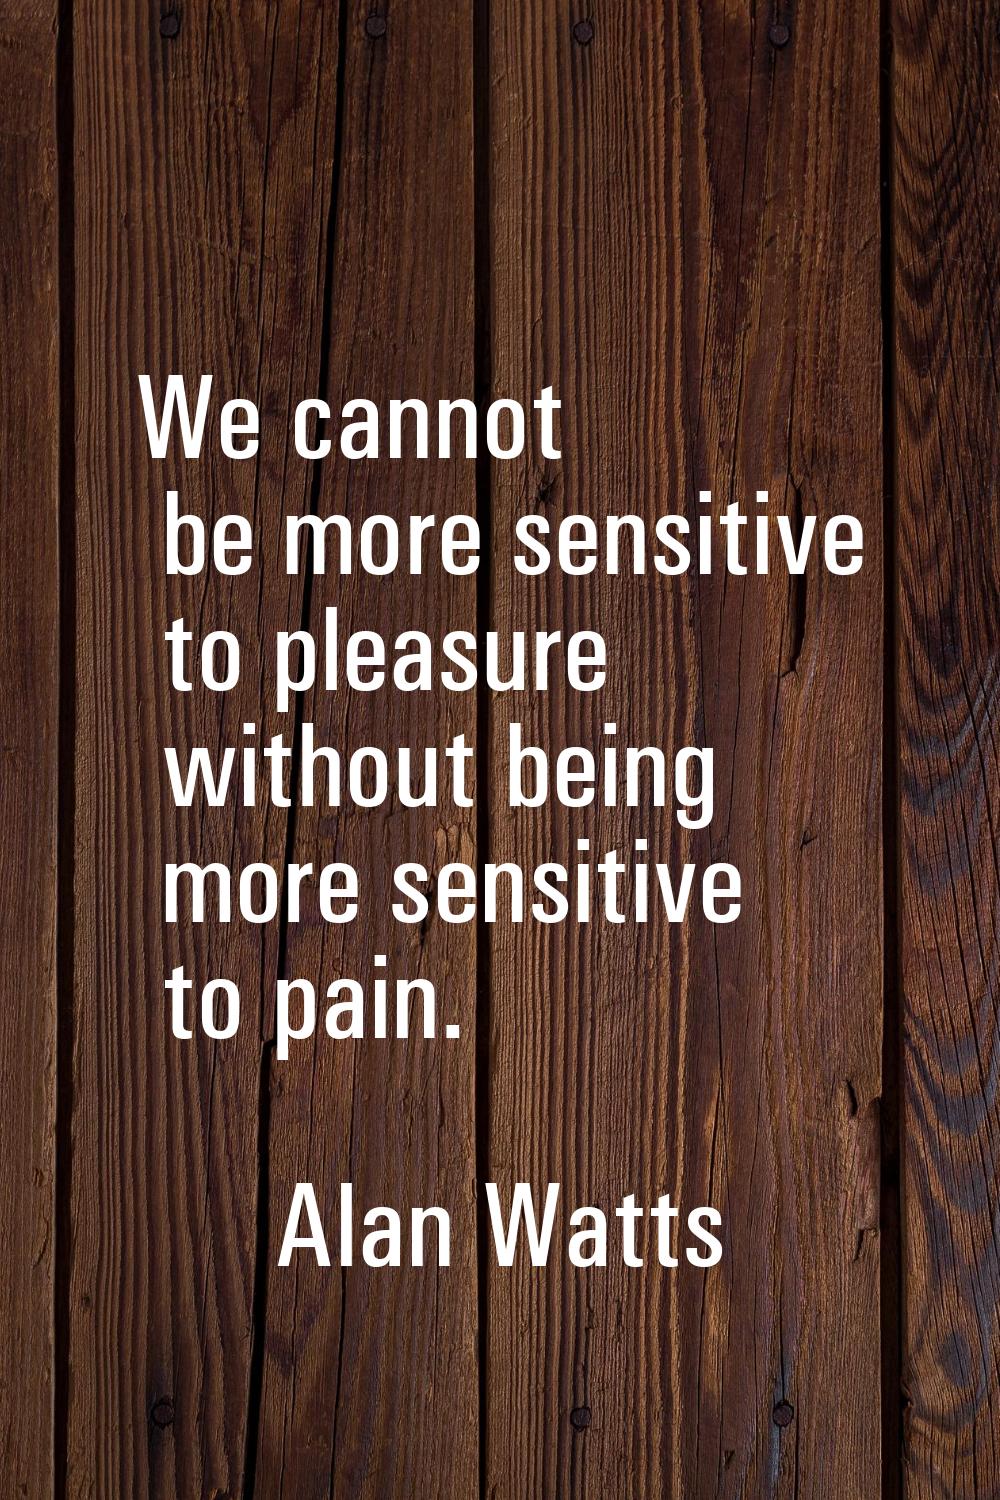 We cannot be more sensitive to pleasure without being more sensitive to pain.